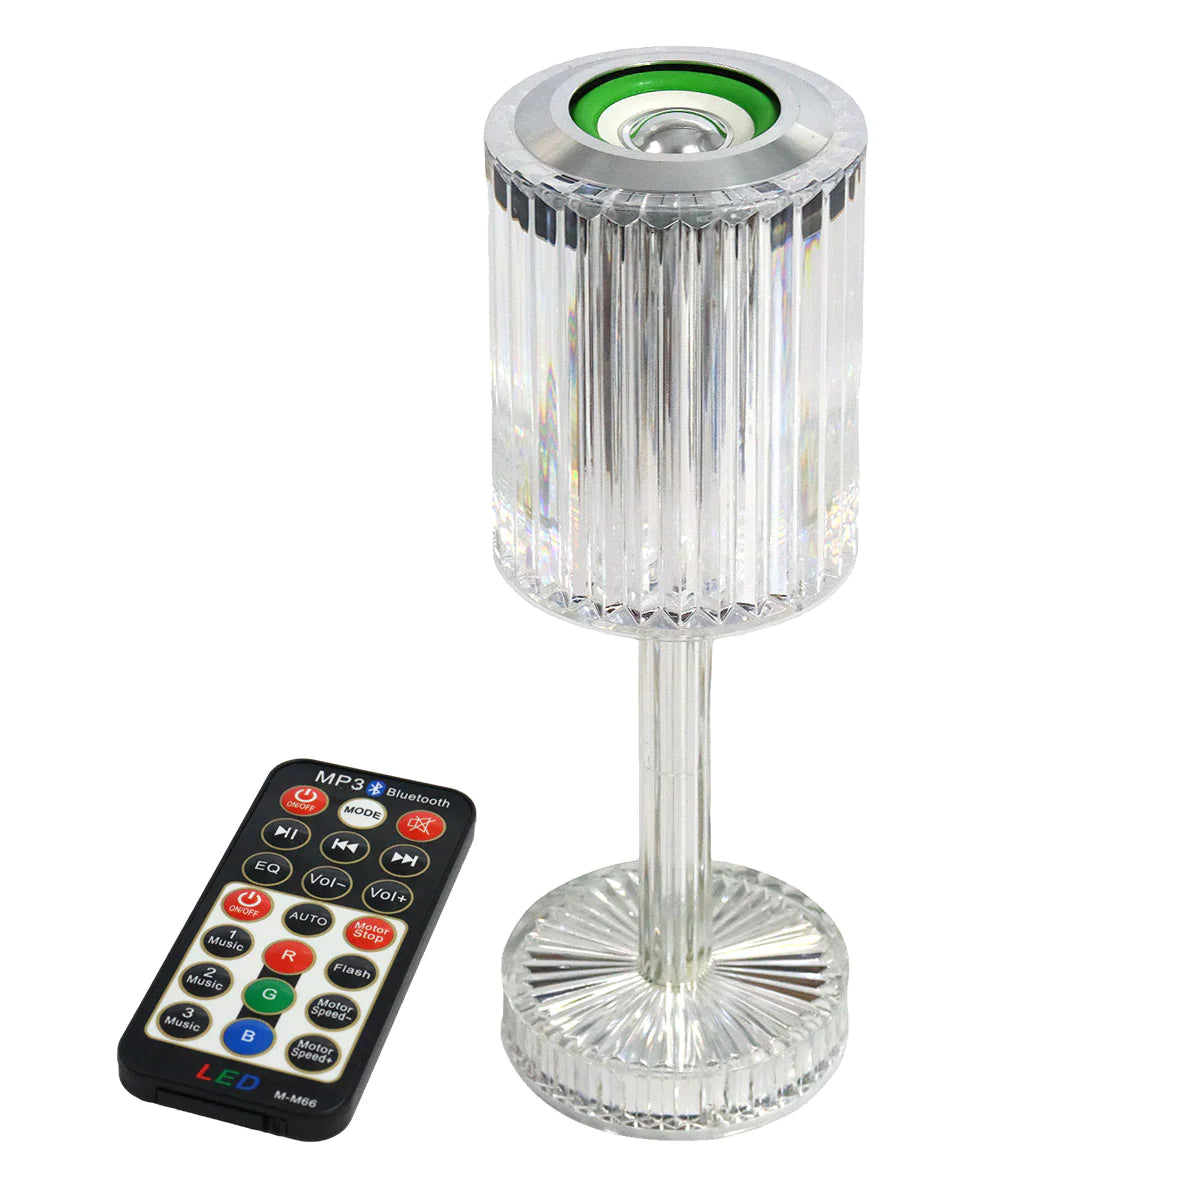 Glass Shape Crystal Lamp With Bluetooth Speaker,  LED Bluetooth Speaker Crystal Lamp with Remote,  Crystal Lights RGB Color Decor Bluetooth Speaker